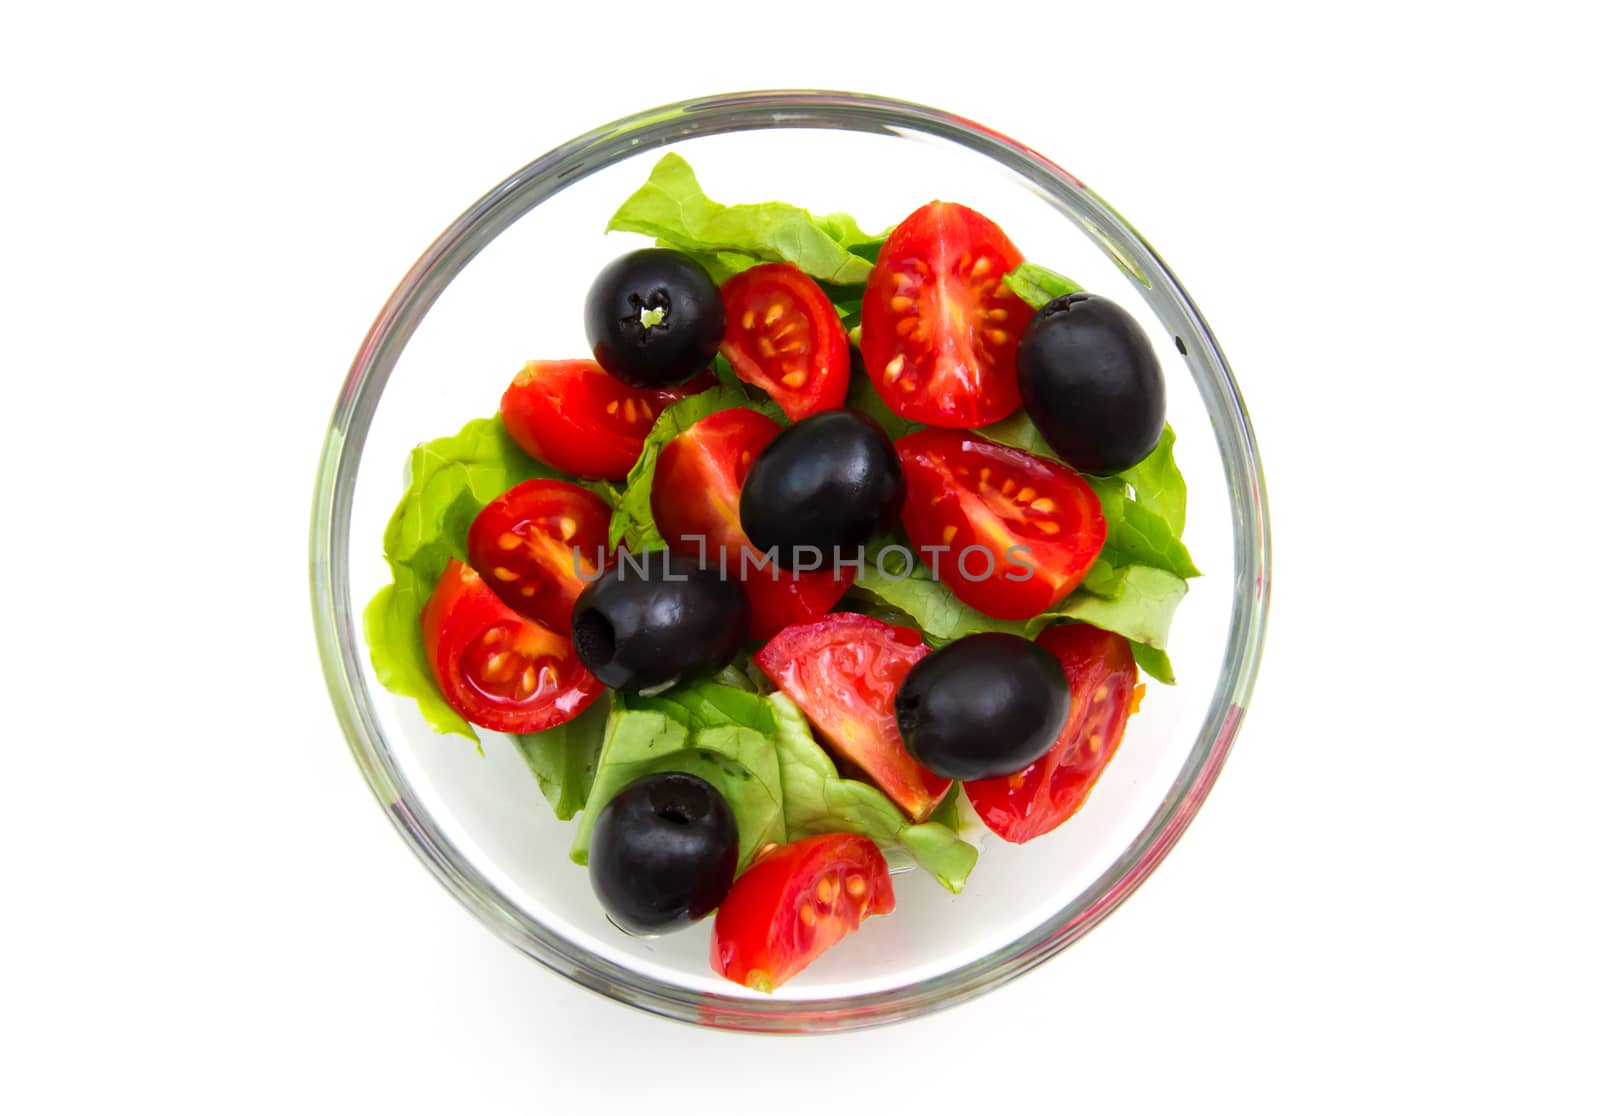 Fresh salad from above on white background